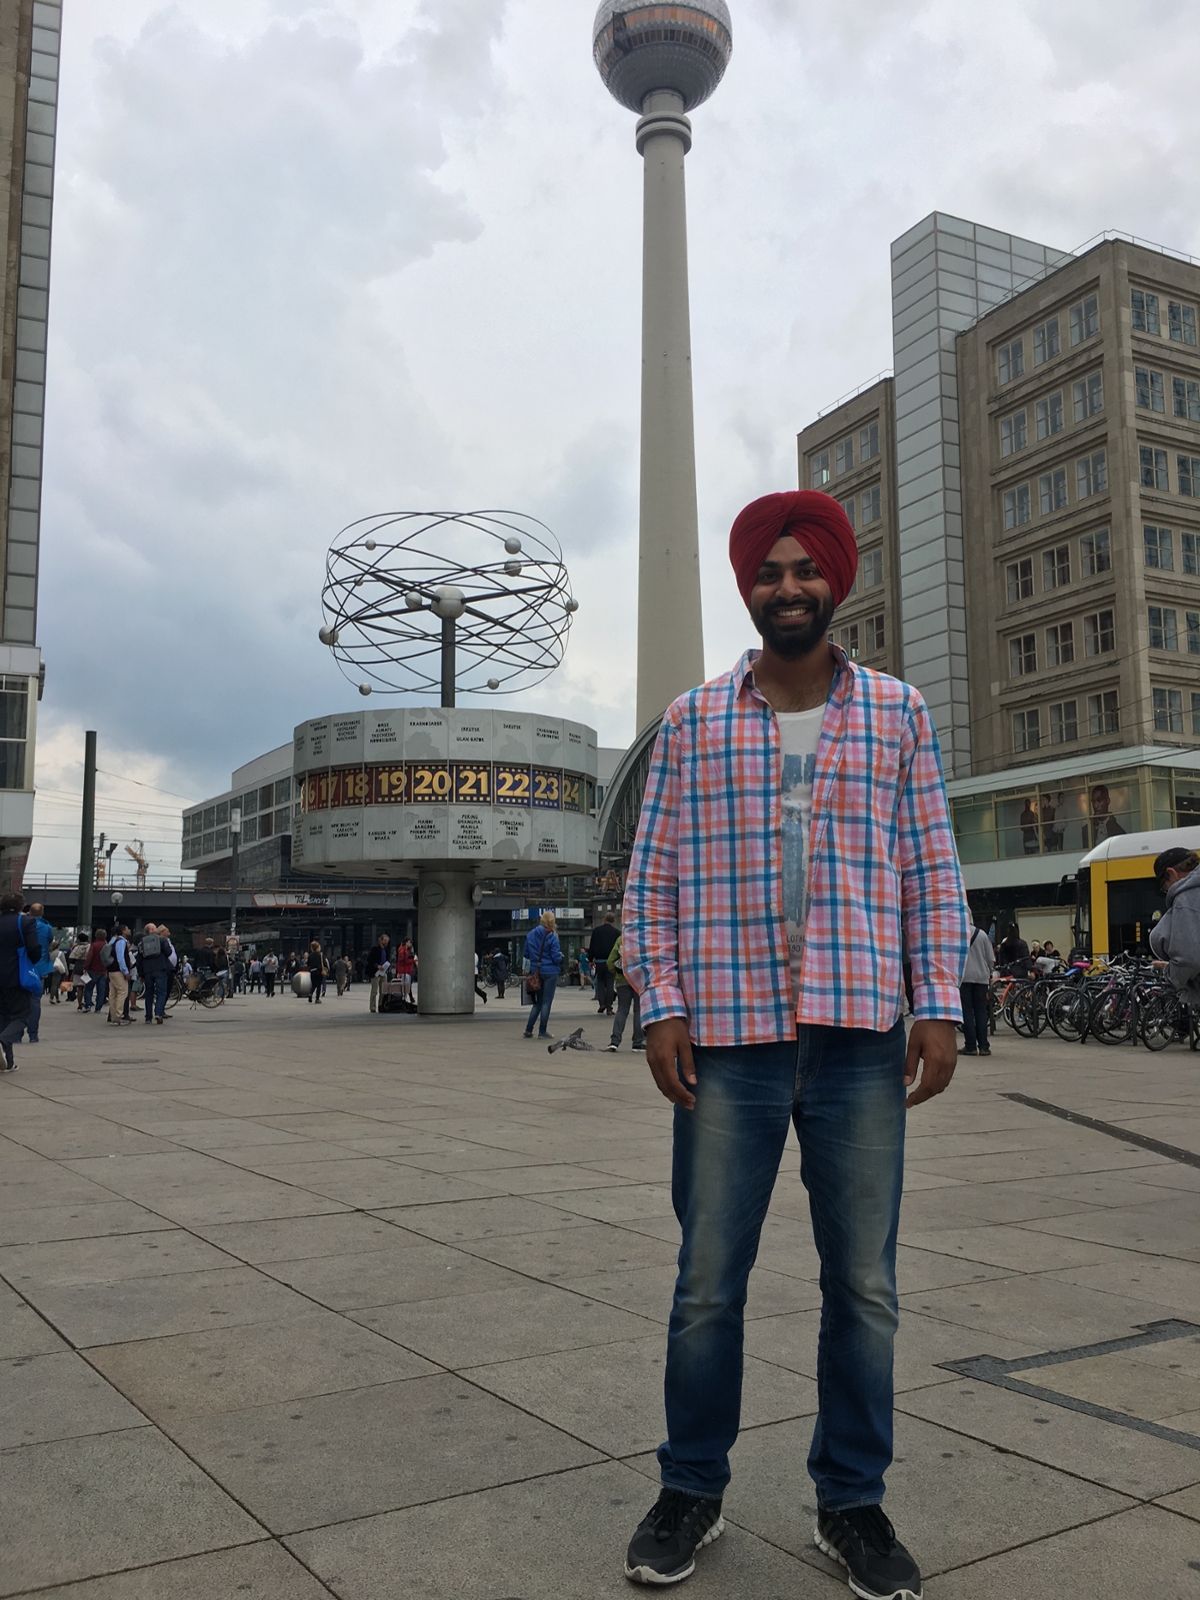 Singh poses in front of the World Clock and TV Tower in Berlin.